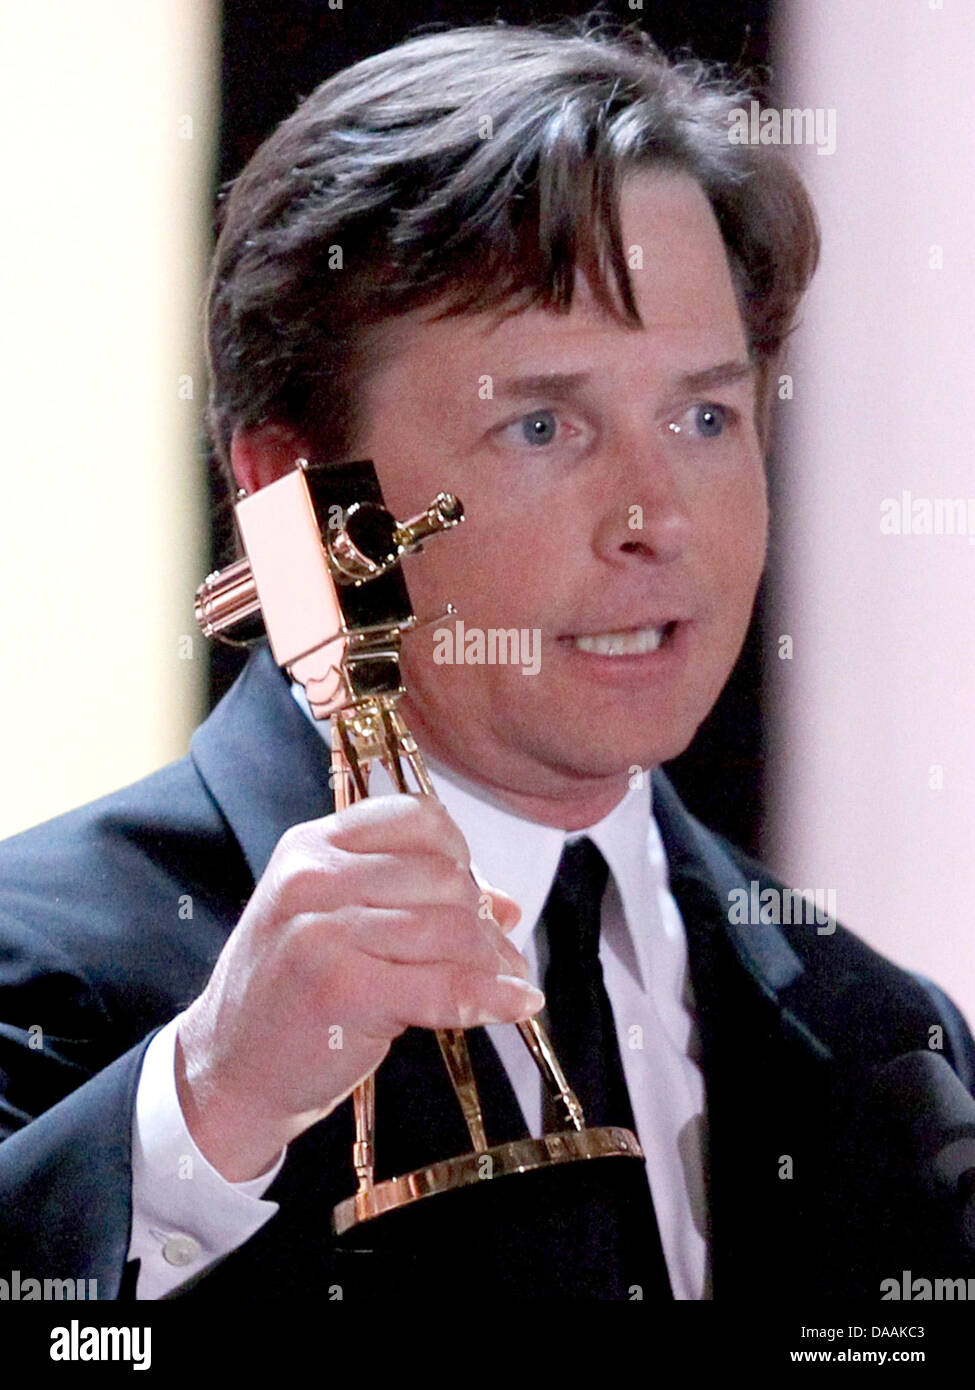 Canadian born actor Michael J. Fox holds his international lifetime achievement award during the 46th Golden Camera award ceremony in Berlin, Germany, 5 February 2011. The award honours the audience's favourites from film, television, sports and media. Photo: Tobias Schwarz dpa/lbn Stock Photo